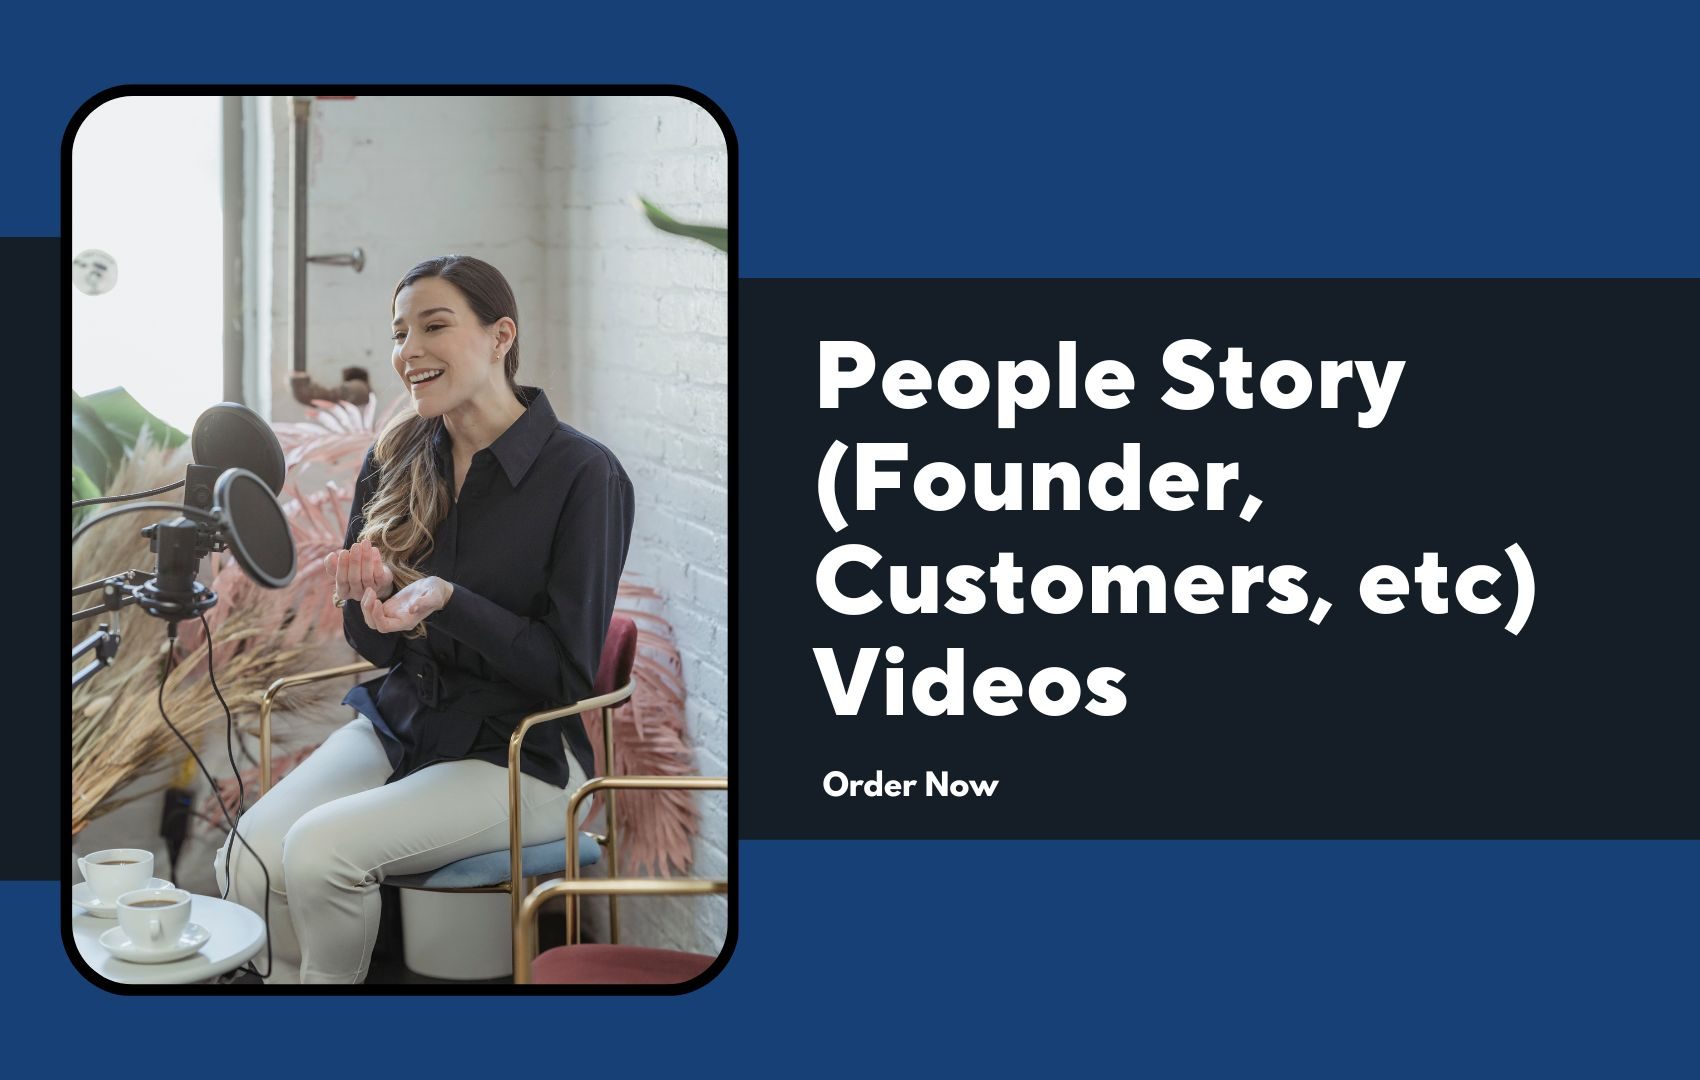 People Story (Founder, Customers, etc) Videos